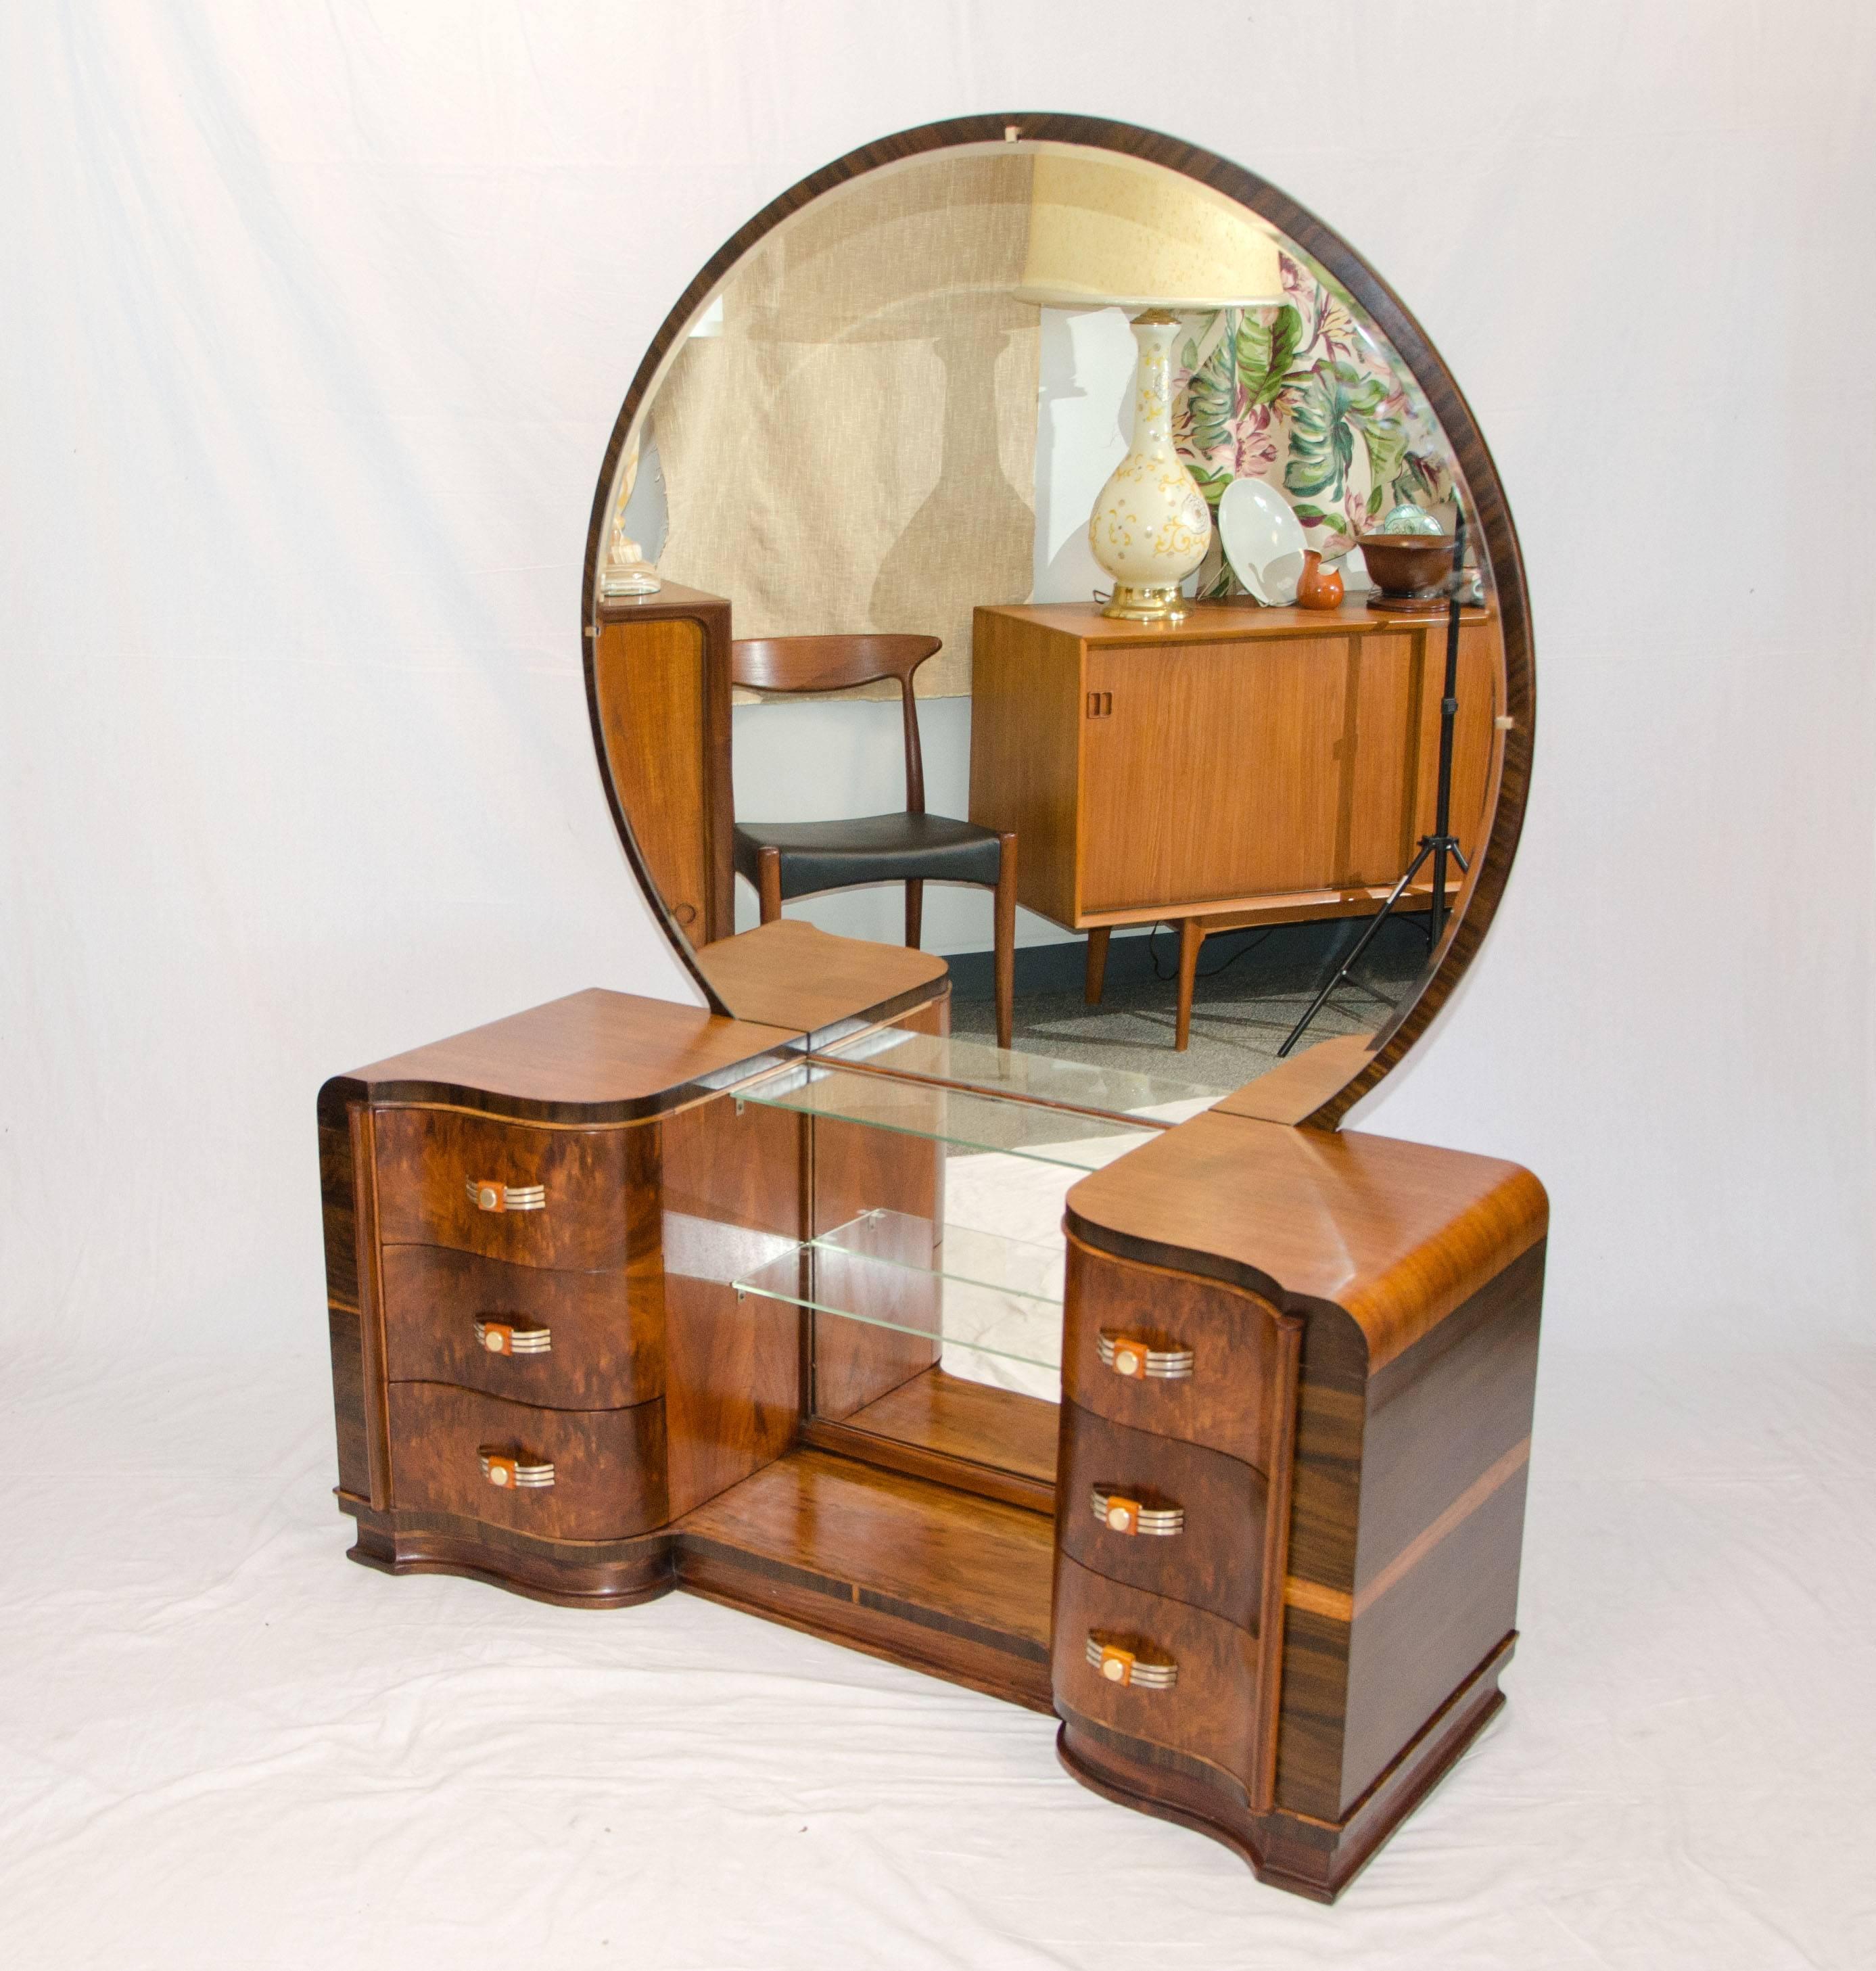 Curvaceous Art Deco walnut vanity with mirror and two banks of drawers that curve into the center with a half serpentine shape. The drawer fronts have book-matched burl walnut grain patterns, the vanity sides also display beautiful grain patterns.